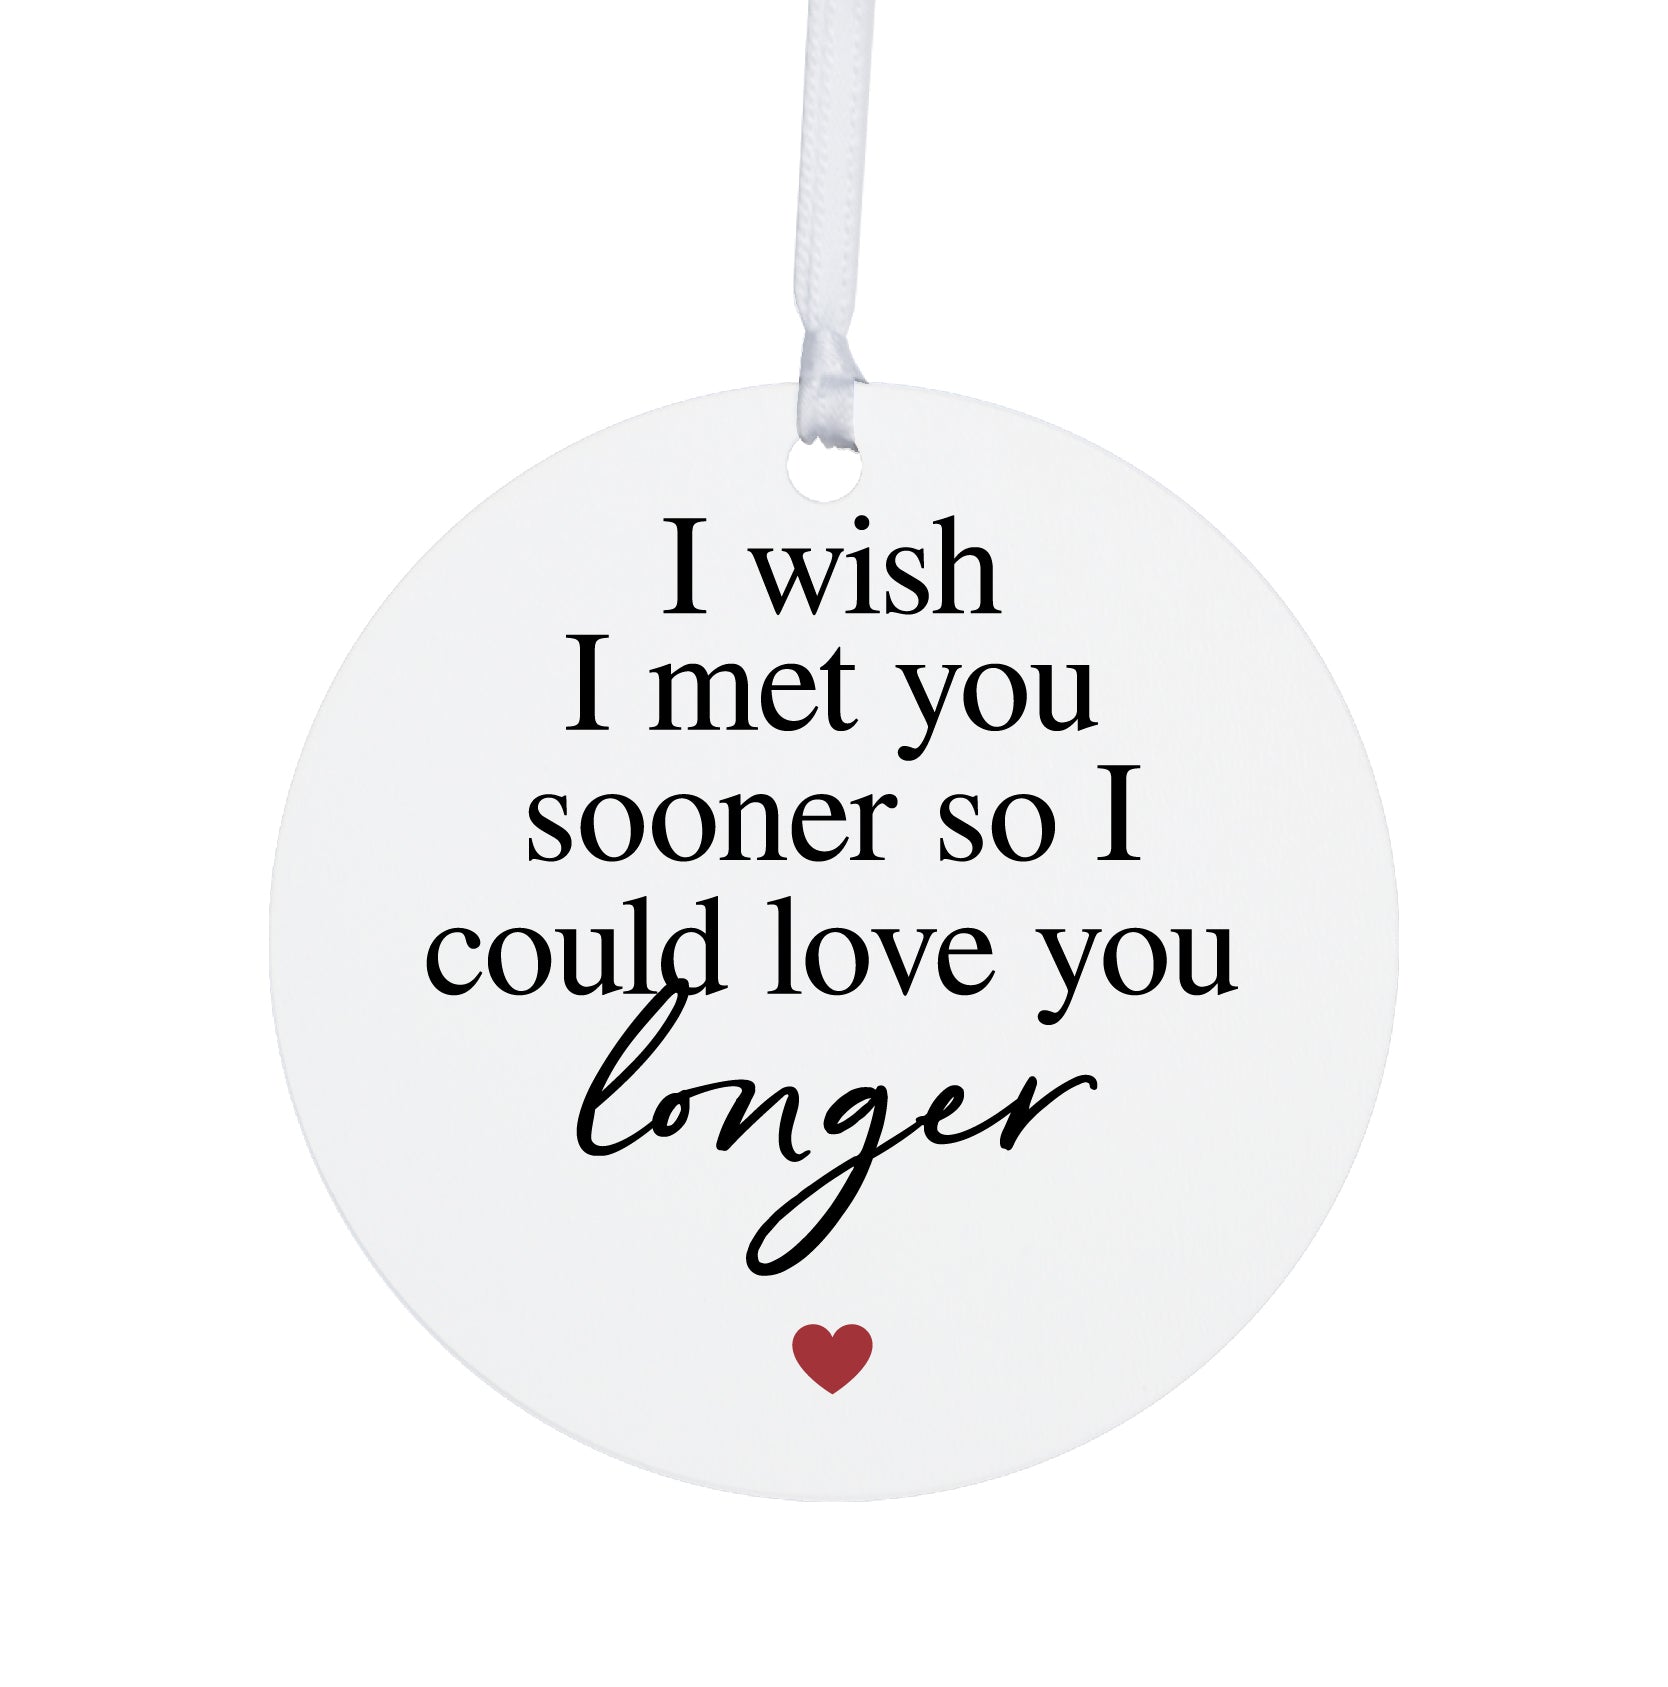 Husband / Boyfriend White Ornament With Inspirational Message Gift Ideas - I Wish I Met You Sooner So I Could Love You Longer - LifeSong Milestones